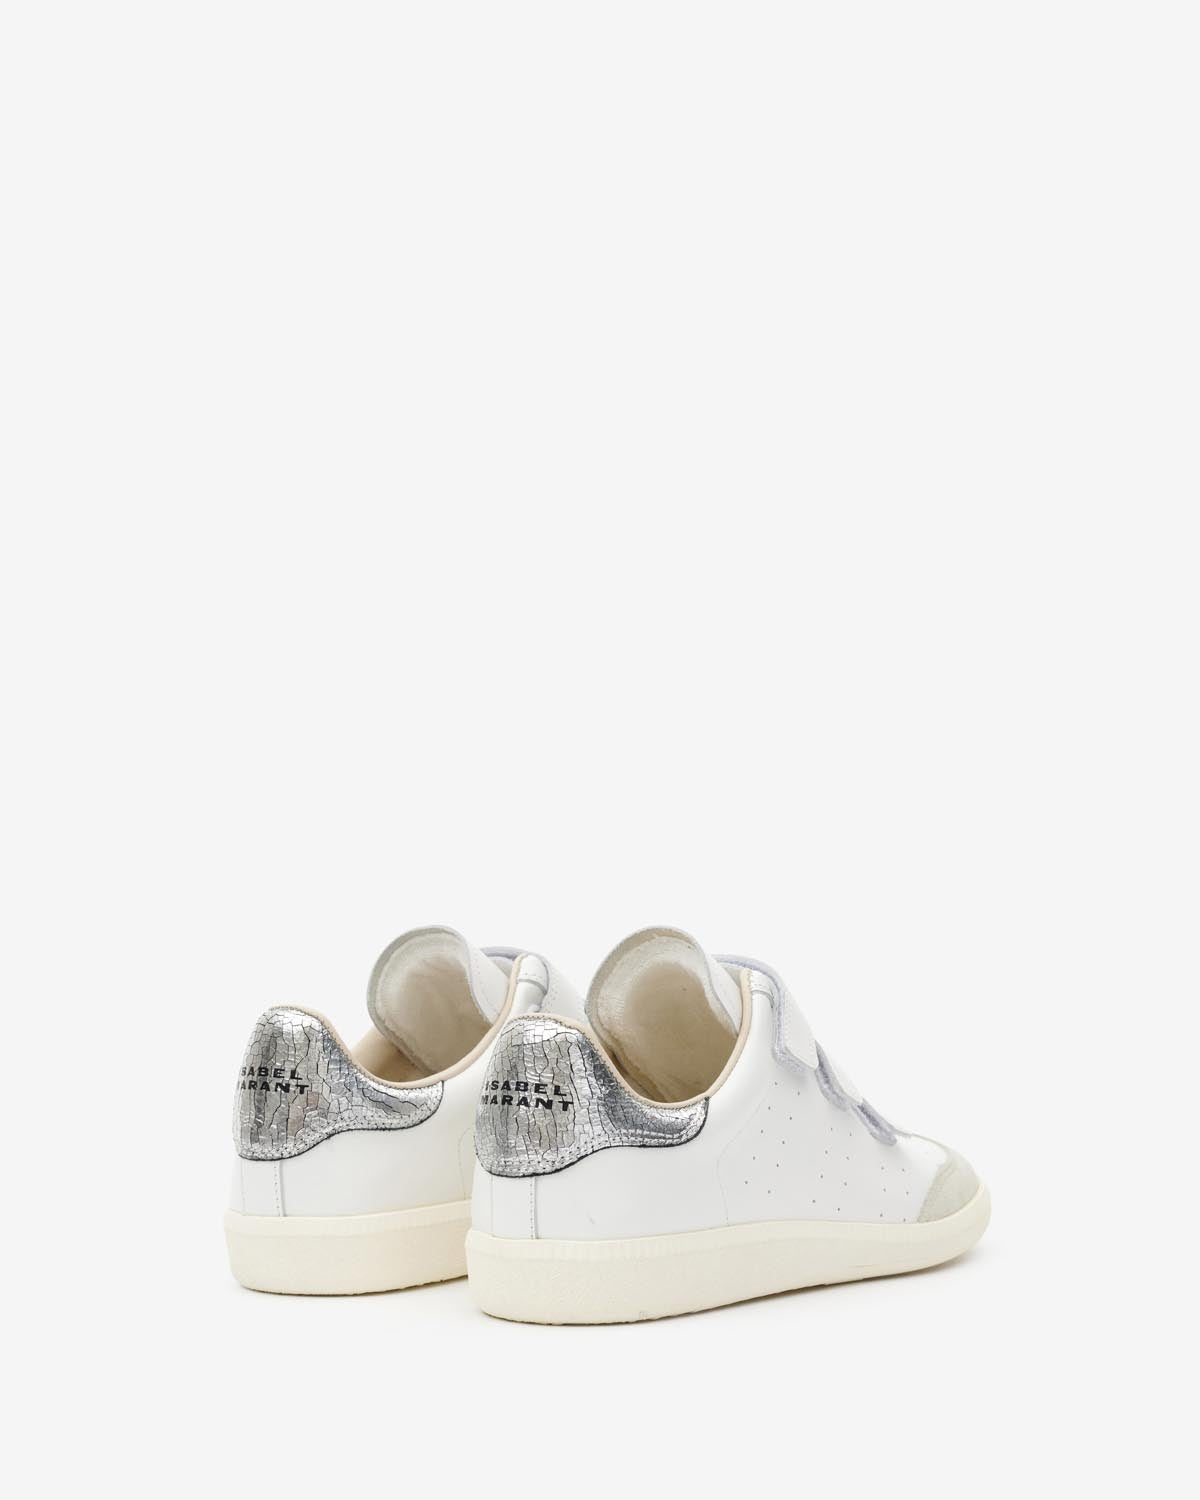 Sneakers Woman and Man | ISABEL MARANT Official Online Store